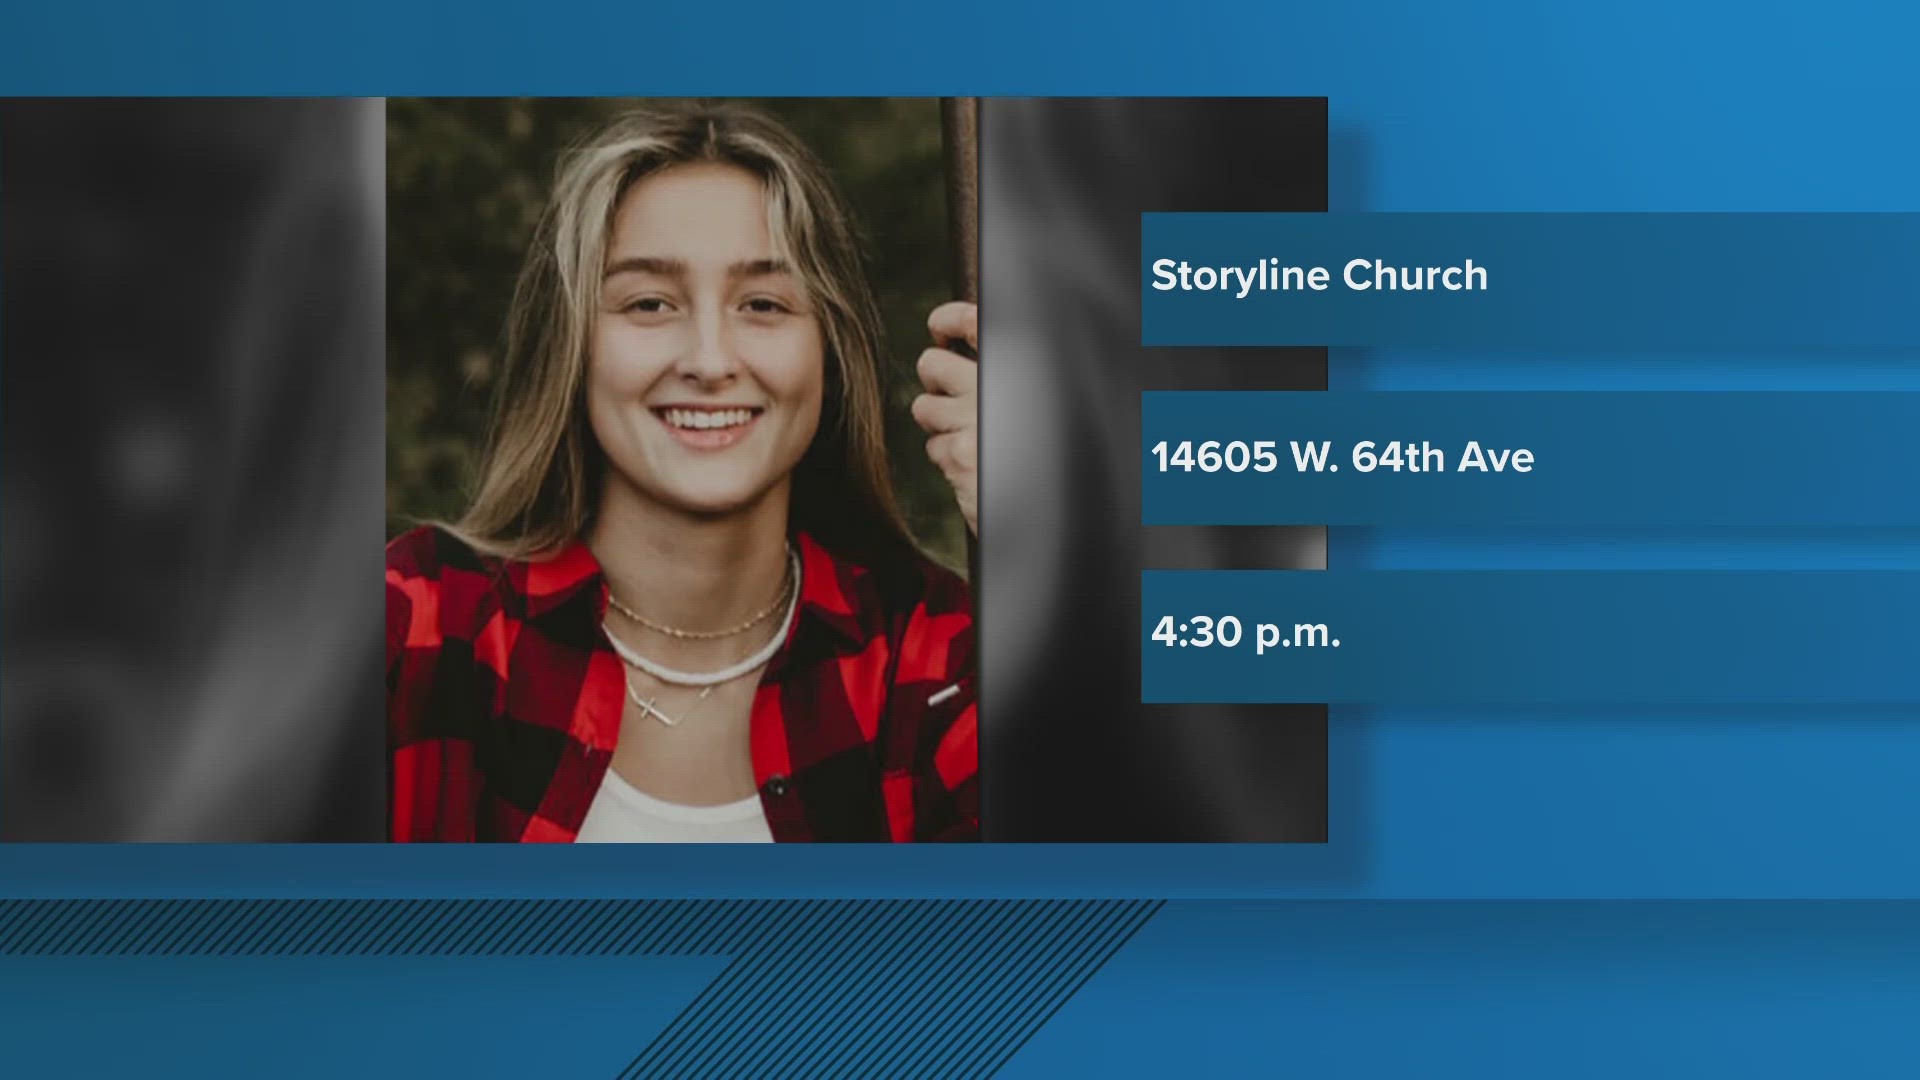 Tomorrow - a community is invited to pay their respects to Alexa Bartell - the young woman killed when someone threw a rock through her windshield last week.